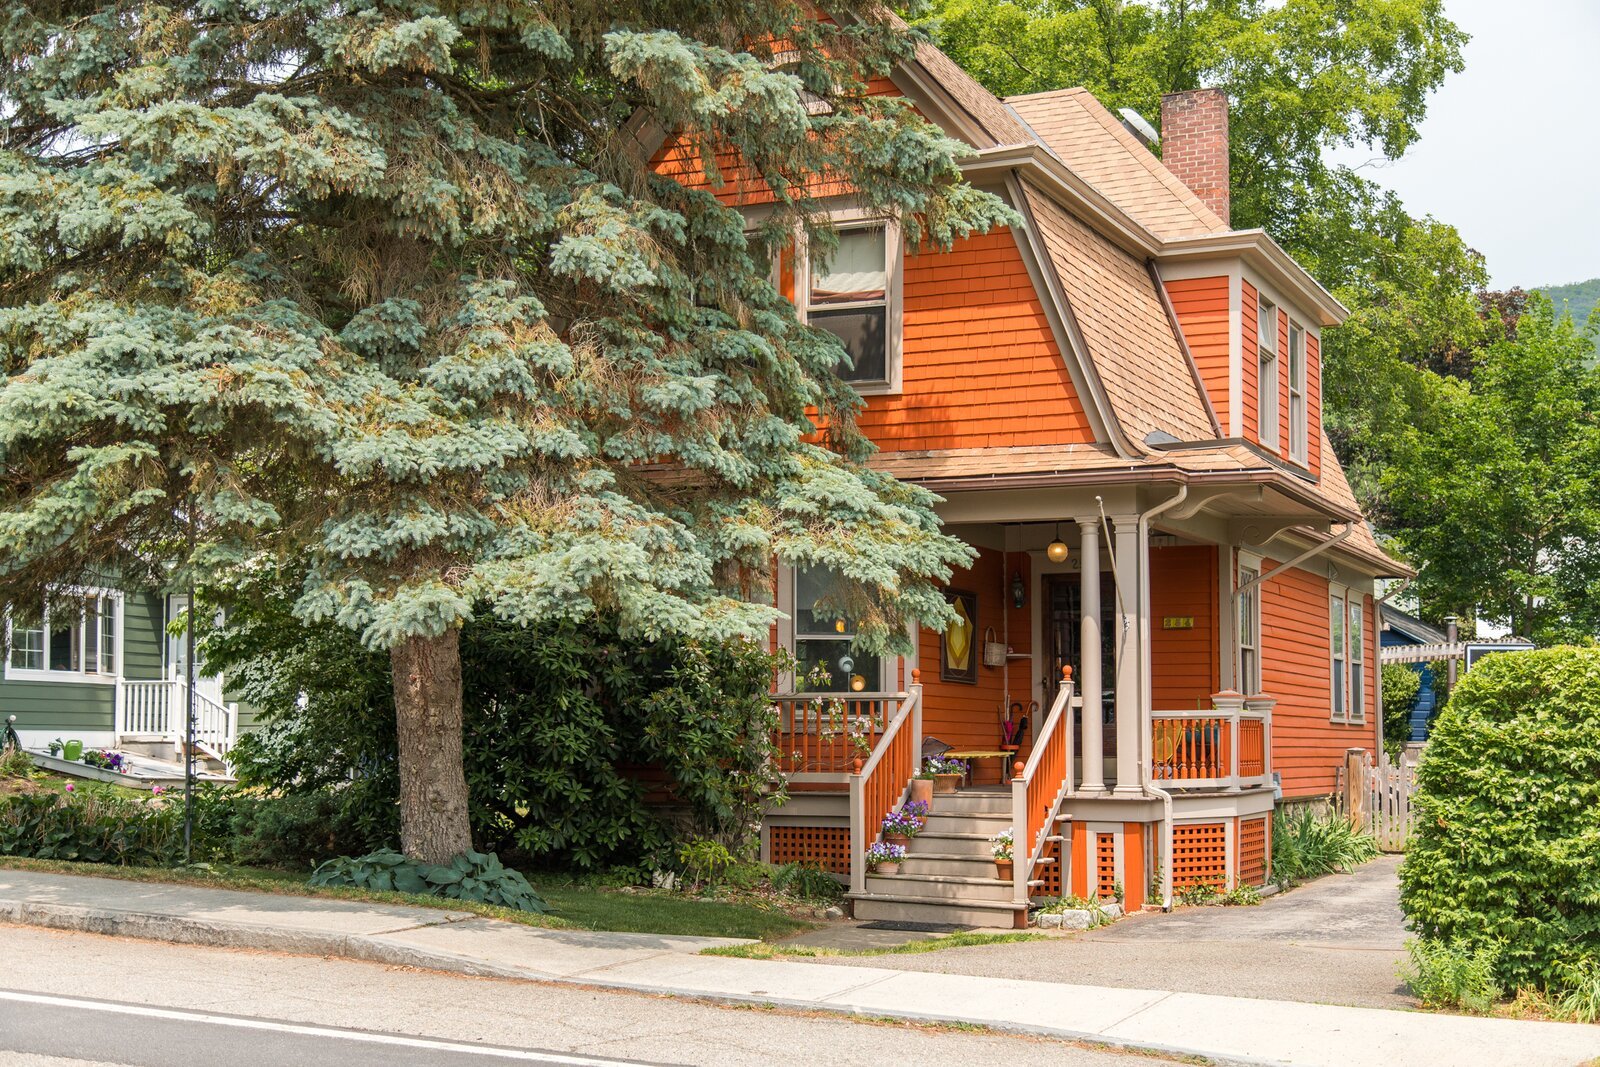 In Upstate New York, a Victorian House With a Wild Side Asks $750K